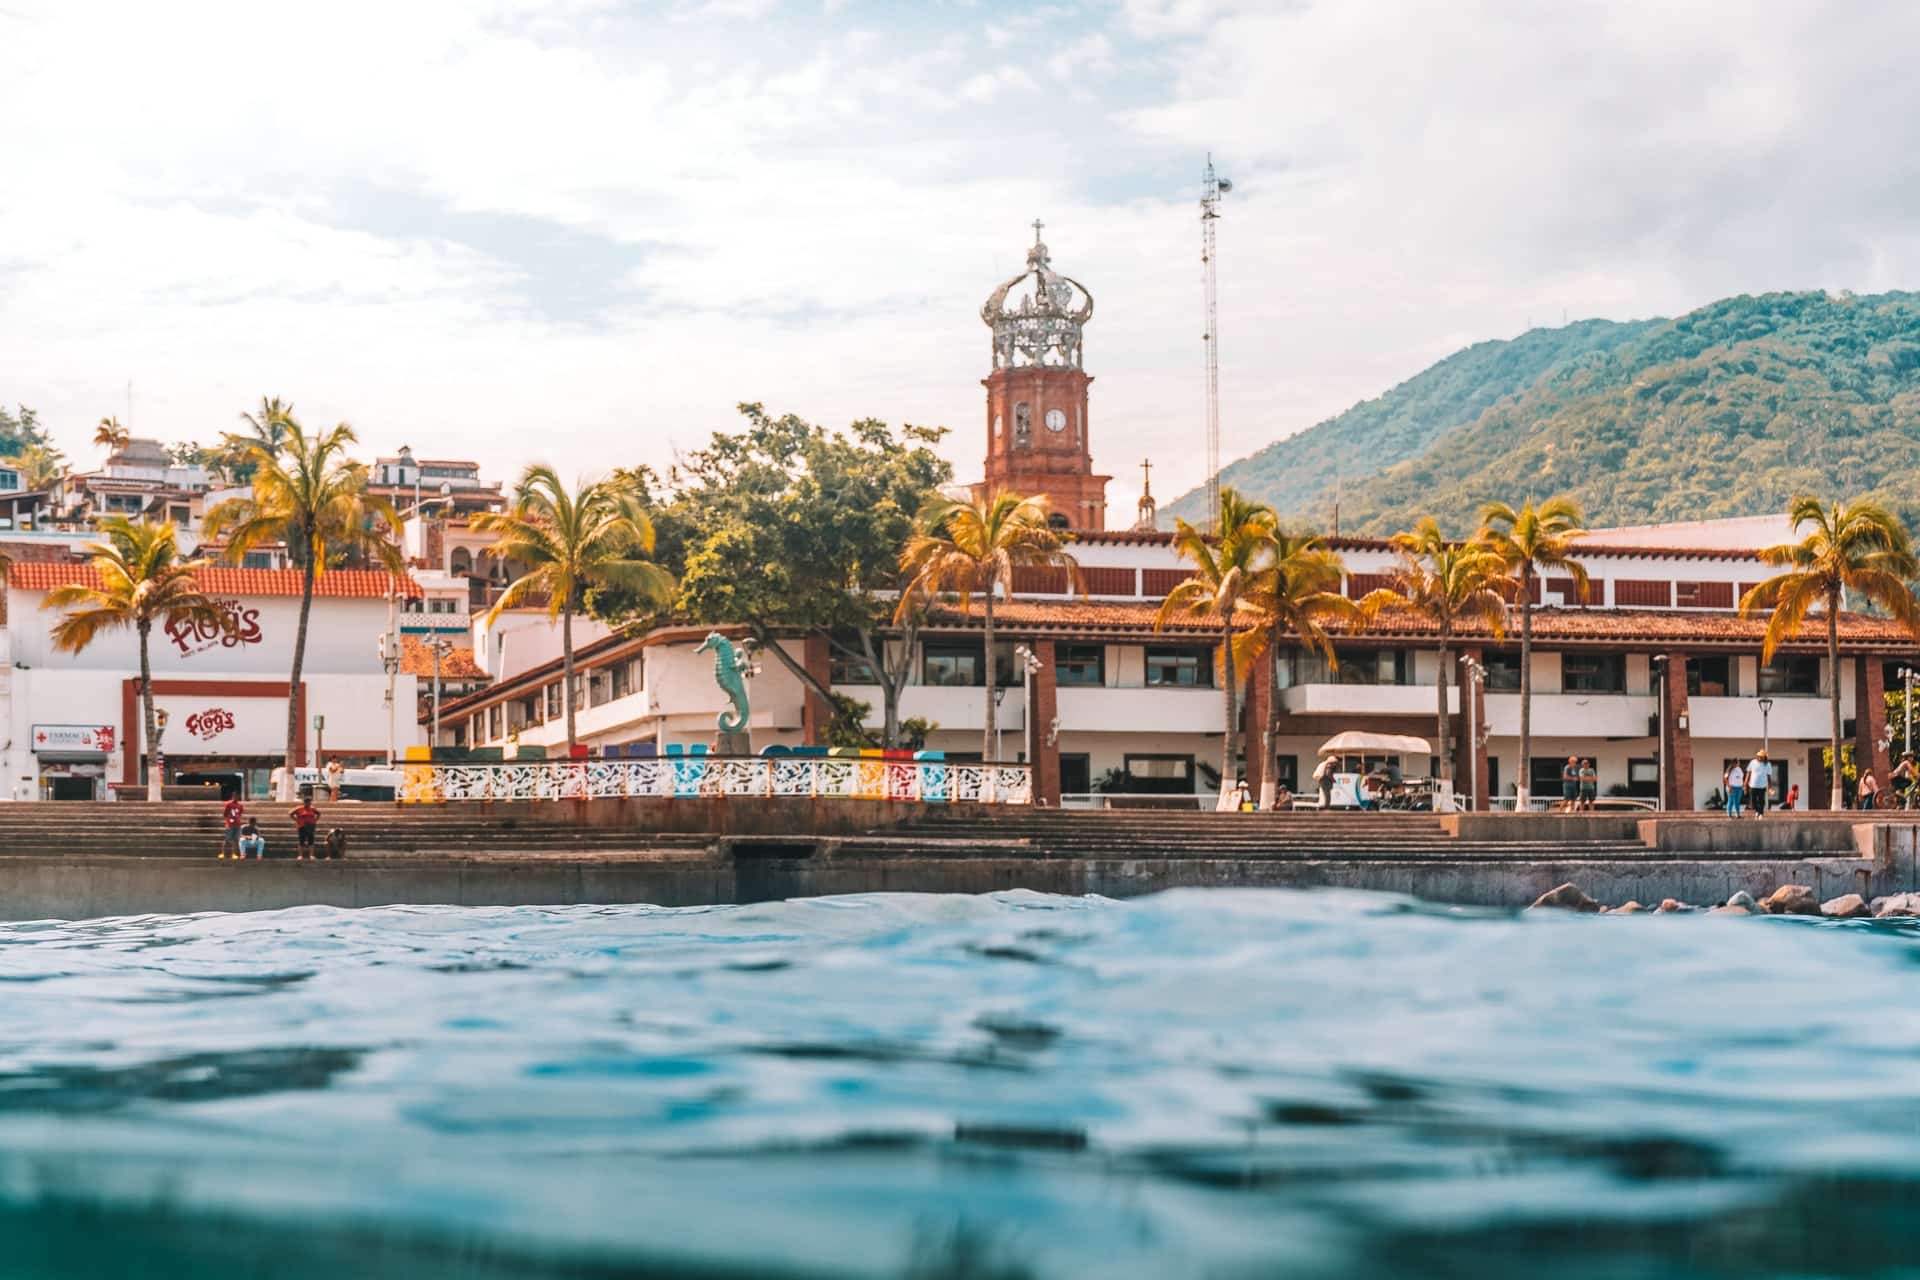 The Best Areas to Stay in Puerto Vallarta, Mexico